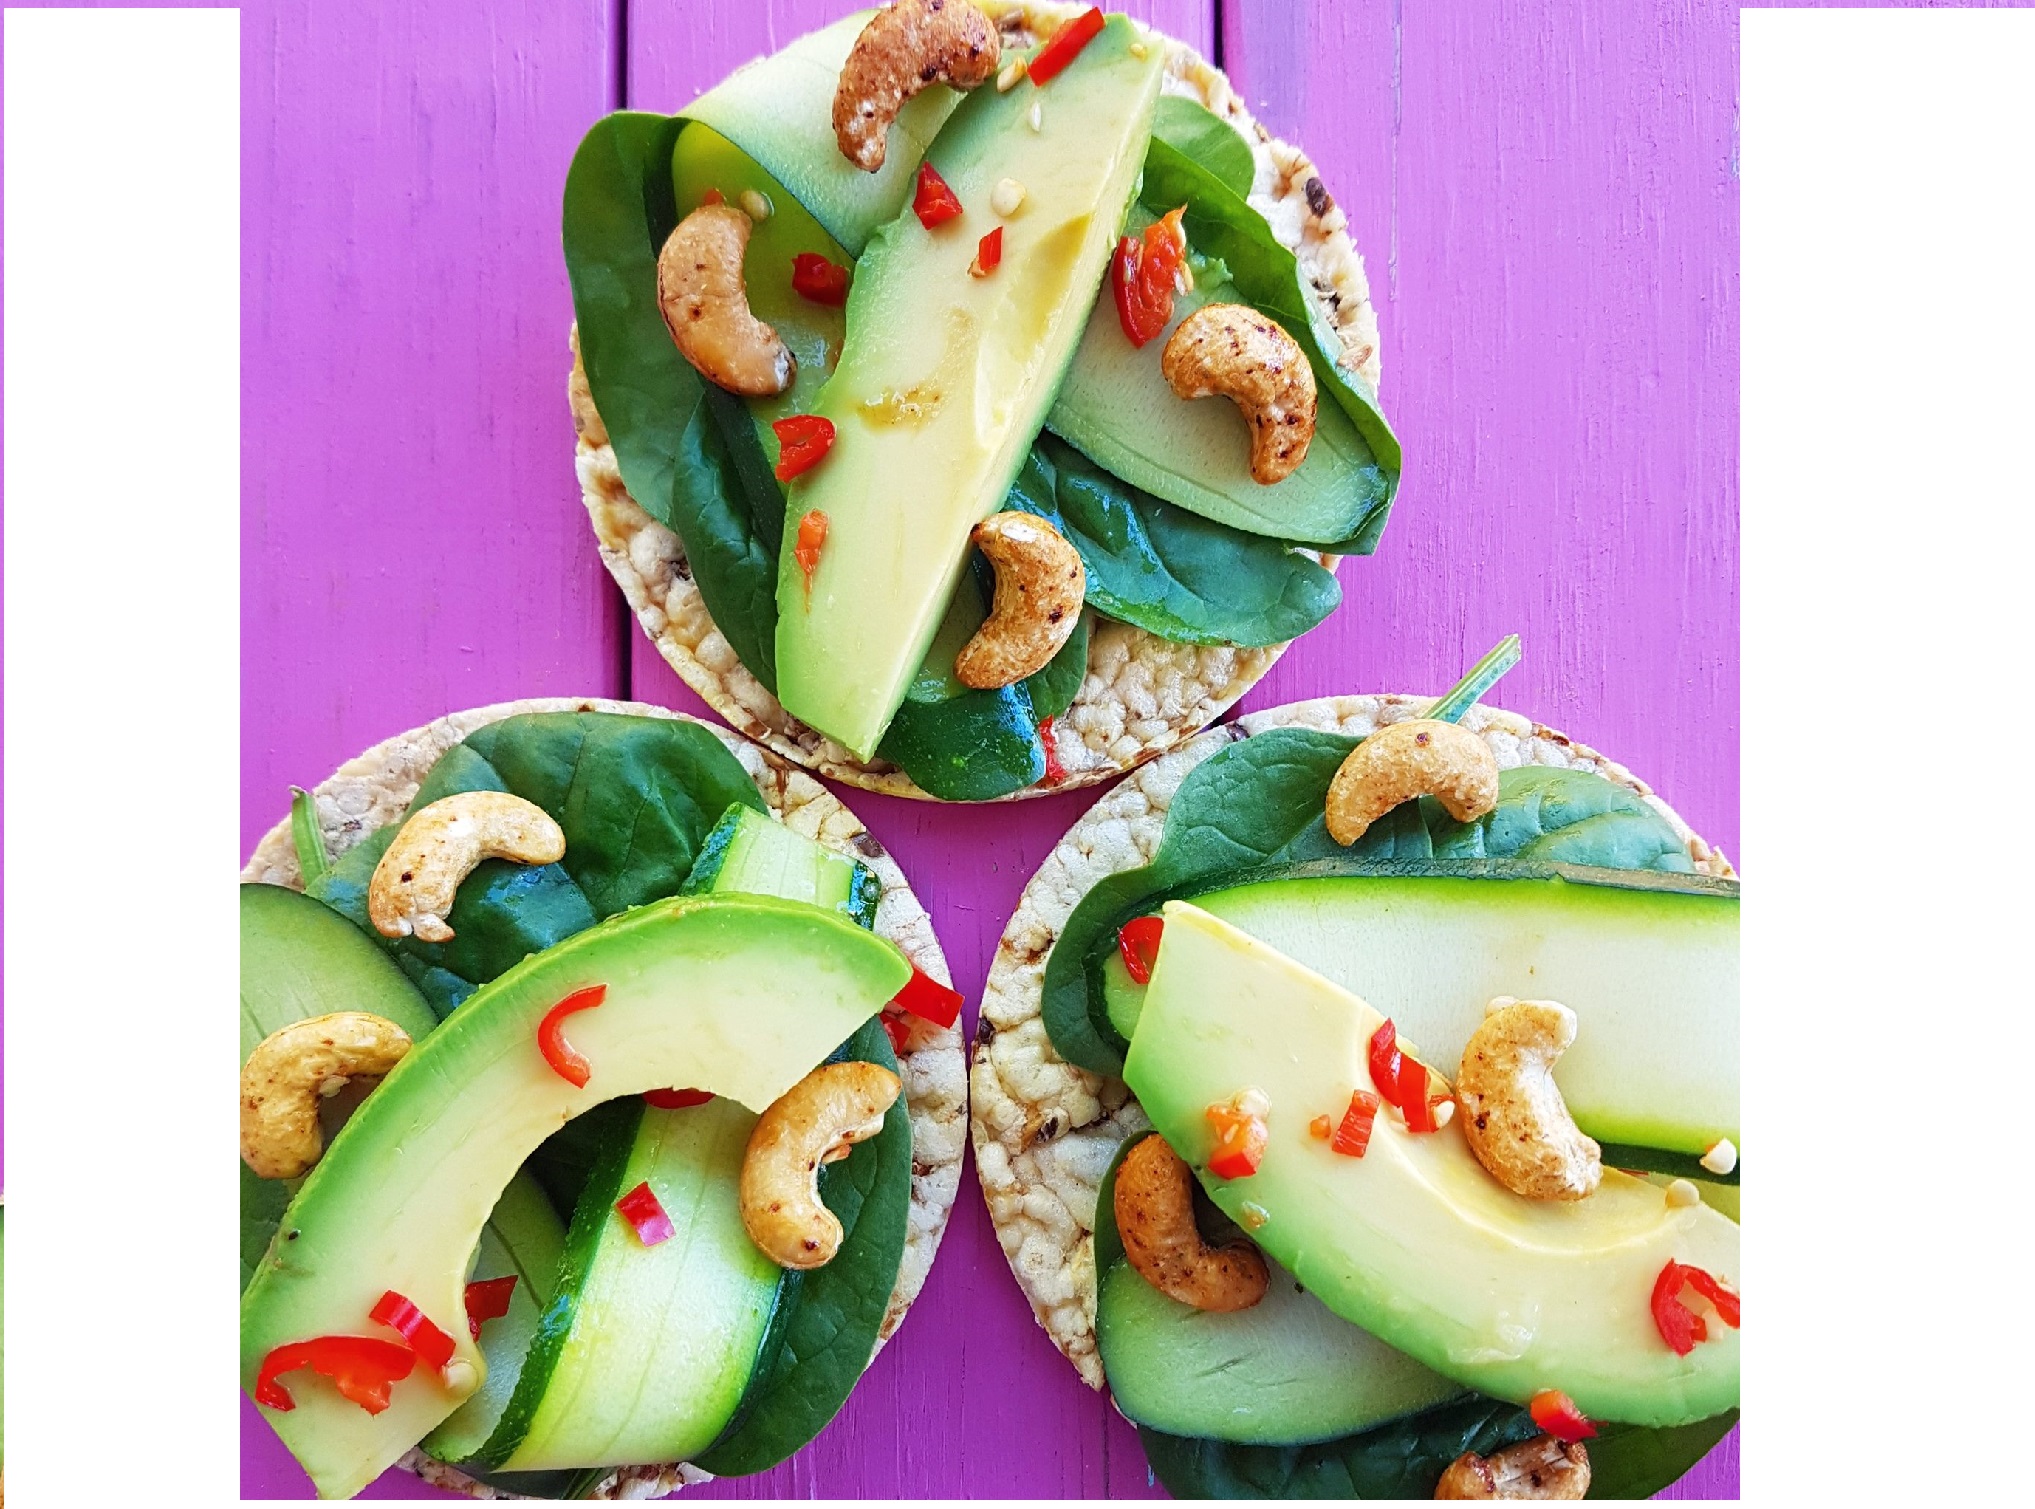 CORN THINS with Avocado, Cashews, Zucchini & Spinach leaves